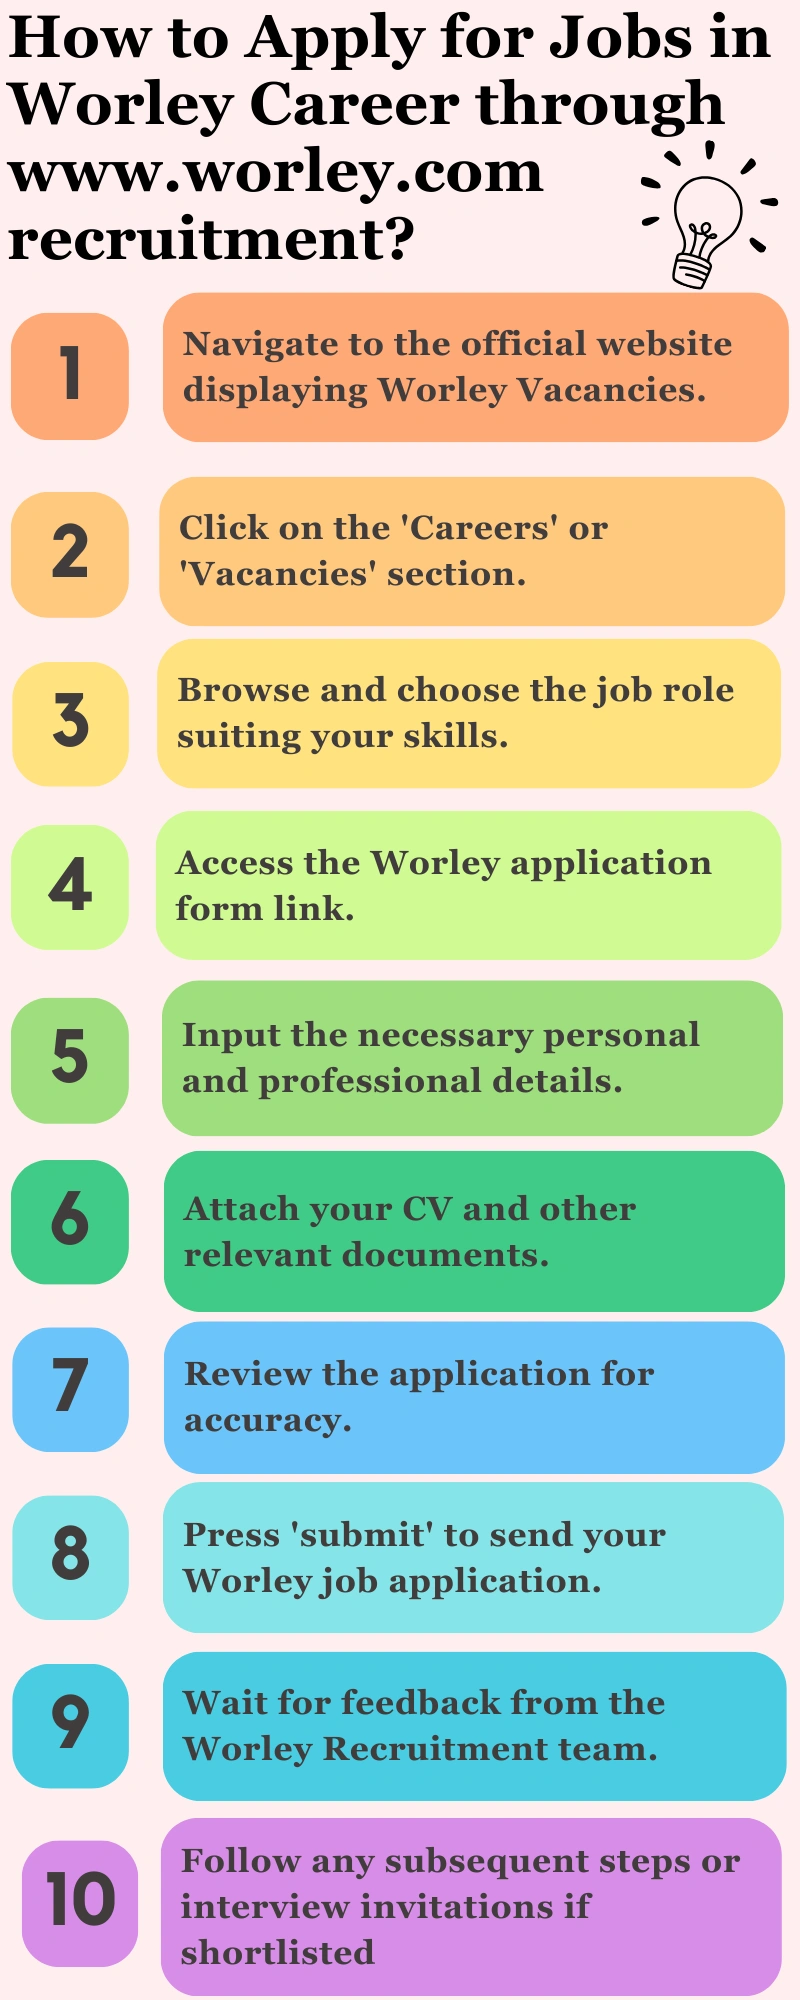 How to Apply for Jobs in Worley Career through www.worley.com recruitment?